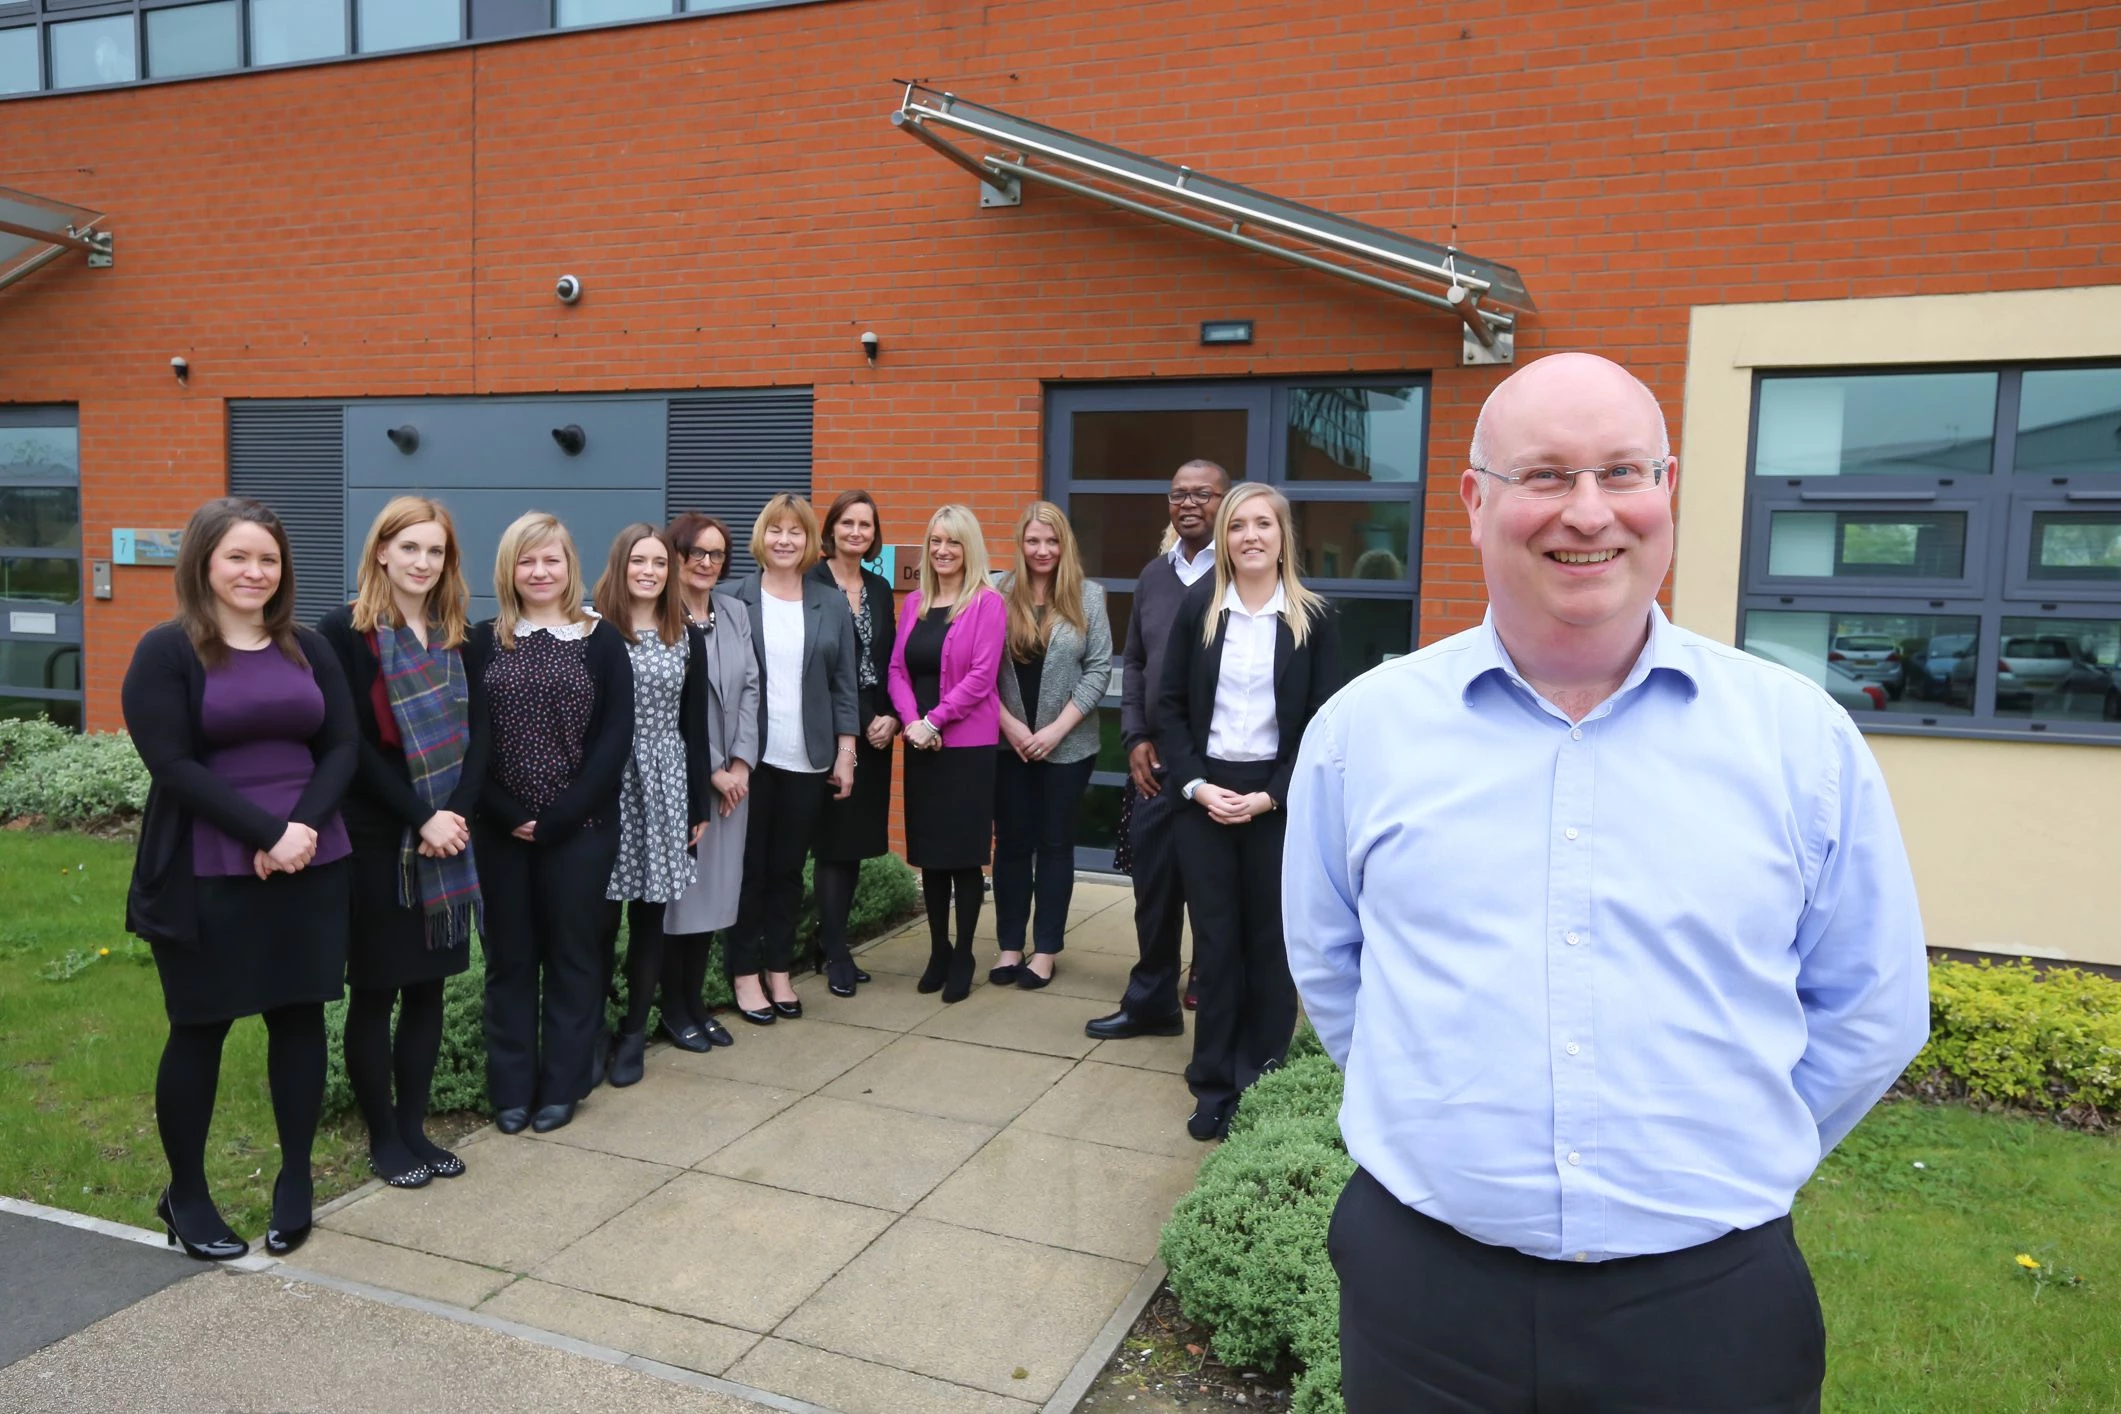 Neil Atkinson, managing director at Deminos, with members of his team.